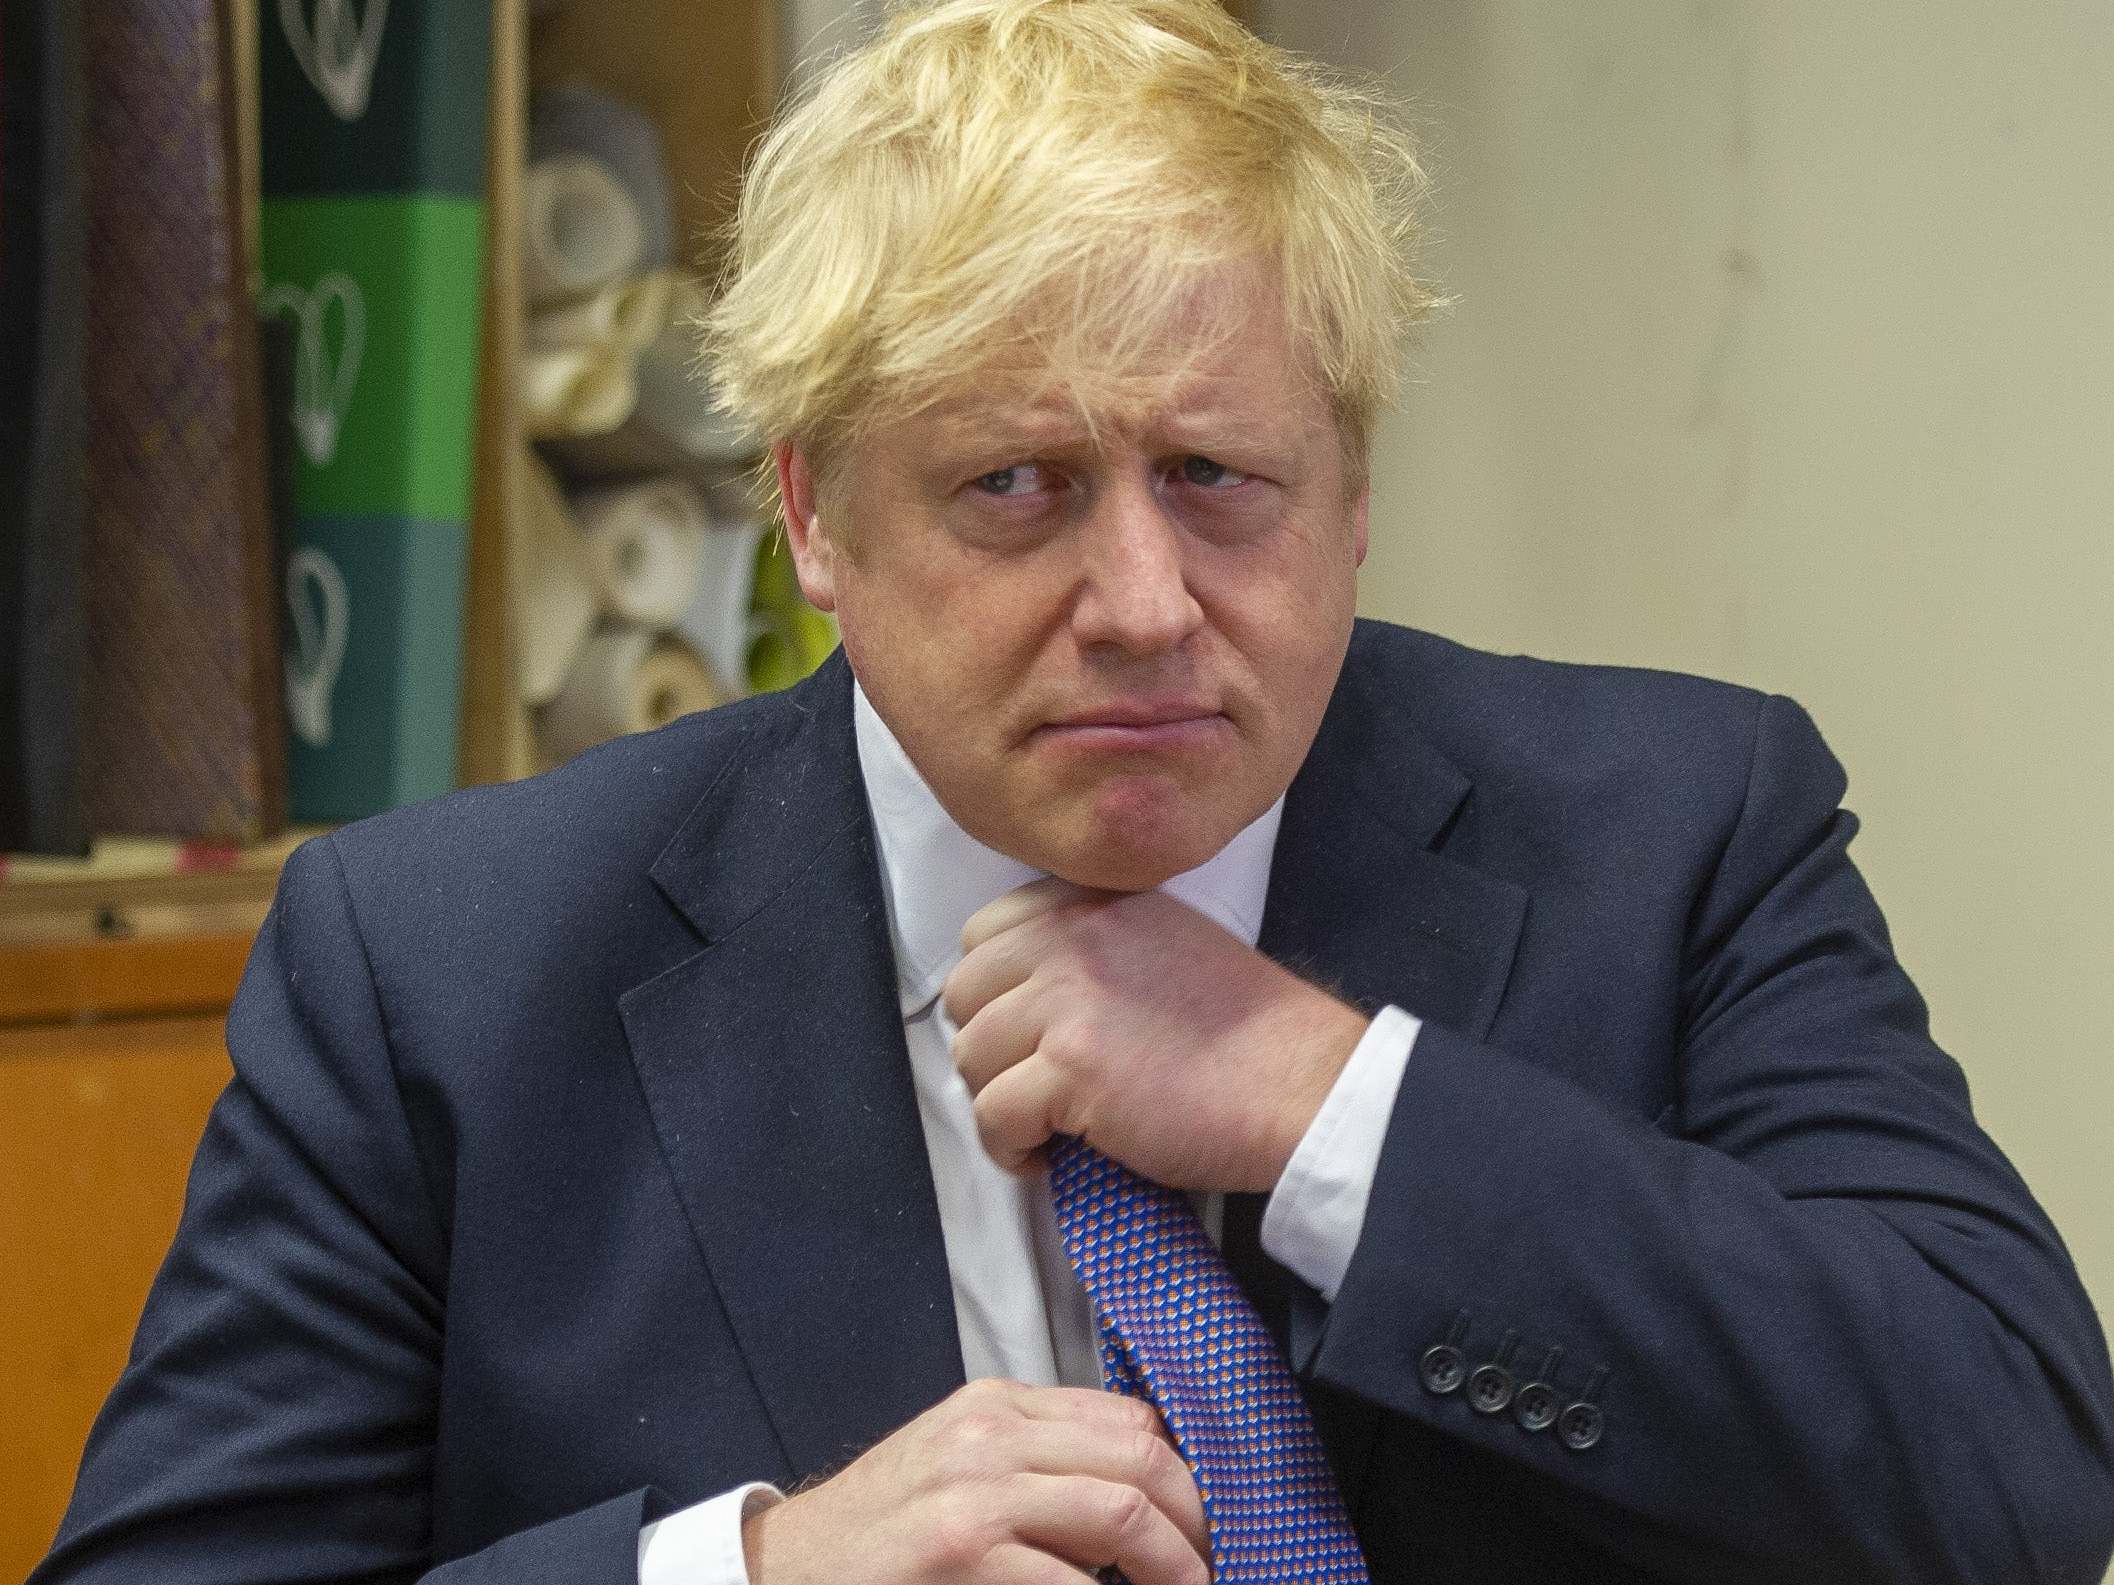 Boris Johnson has yet to visit areas hit by recent flooding